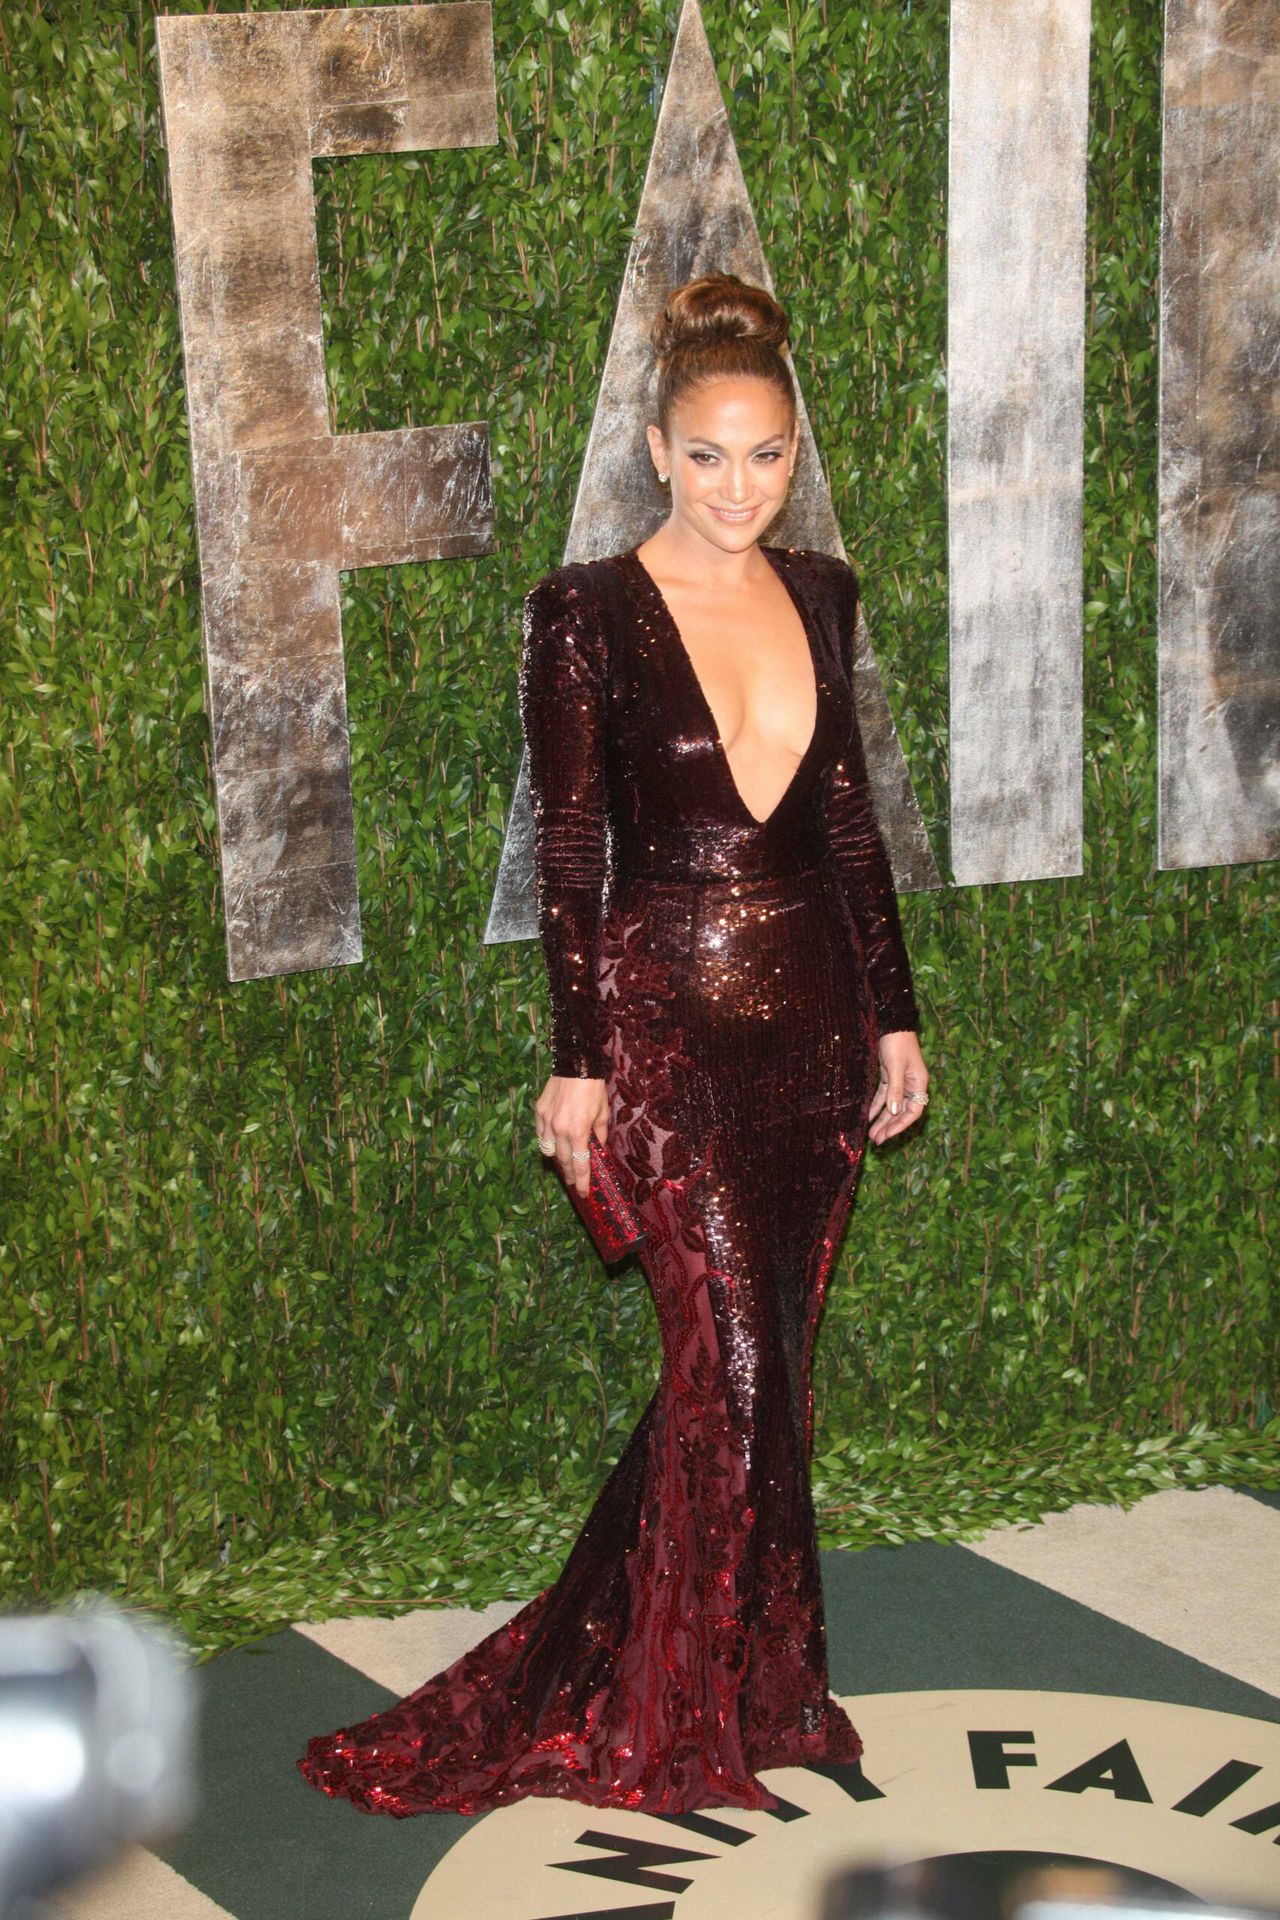 Feb. 26, 2012 - Los Angeles, California, USA - Singer/actress Jennifer Lopez attends the 2012 Vanity Fair Oscar Party at Sunset Tower in Los Angeles, USA, am 26 Februar 2012. 2012.